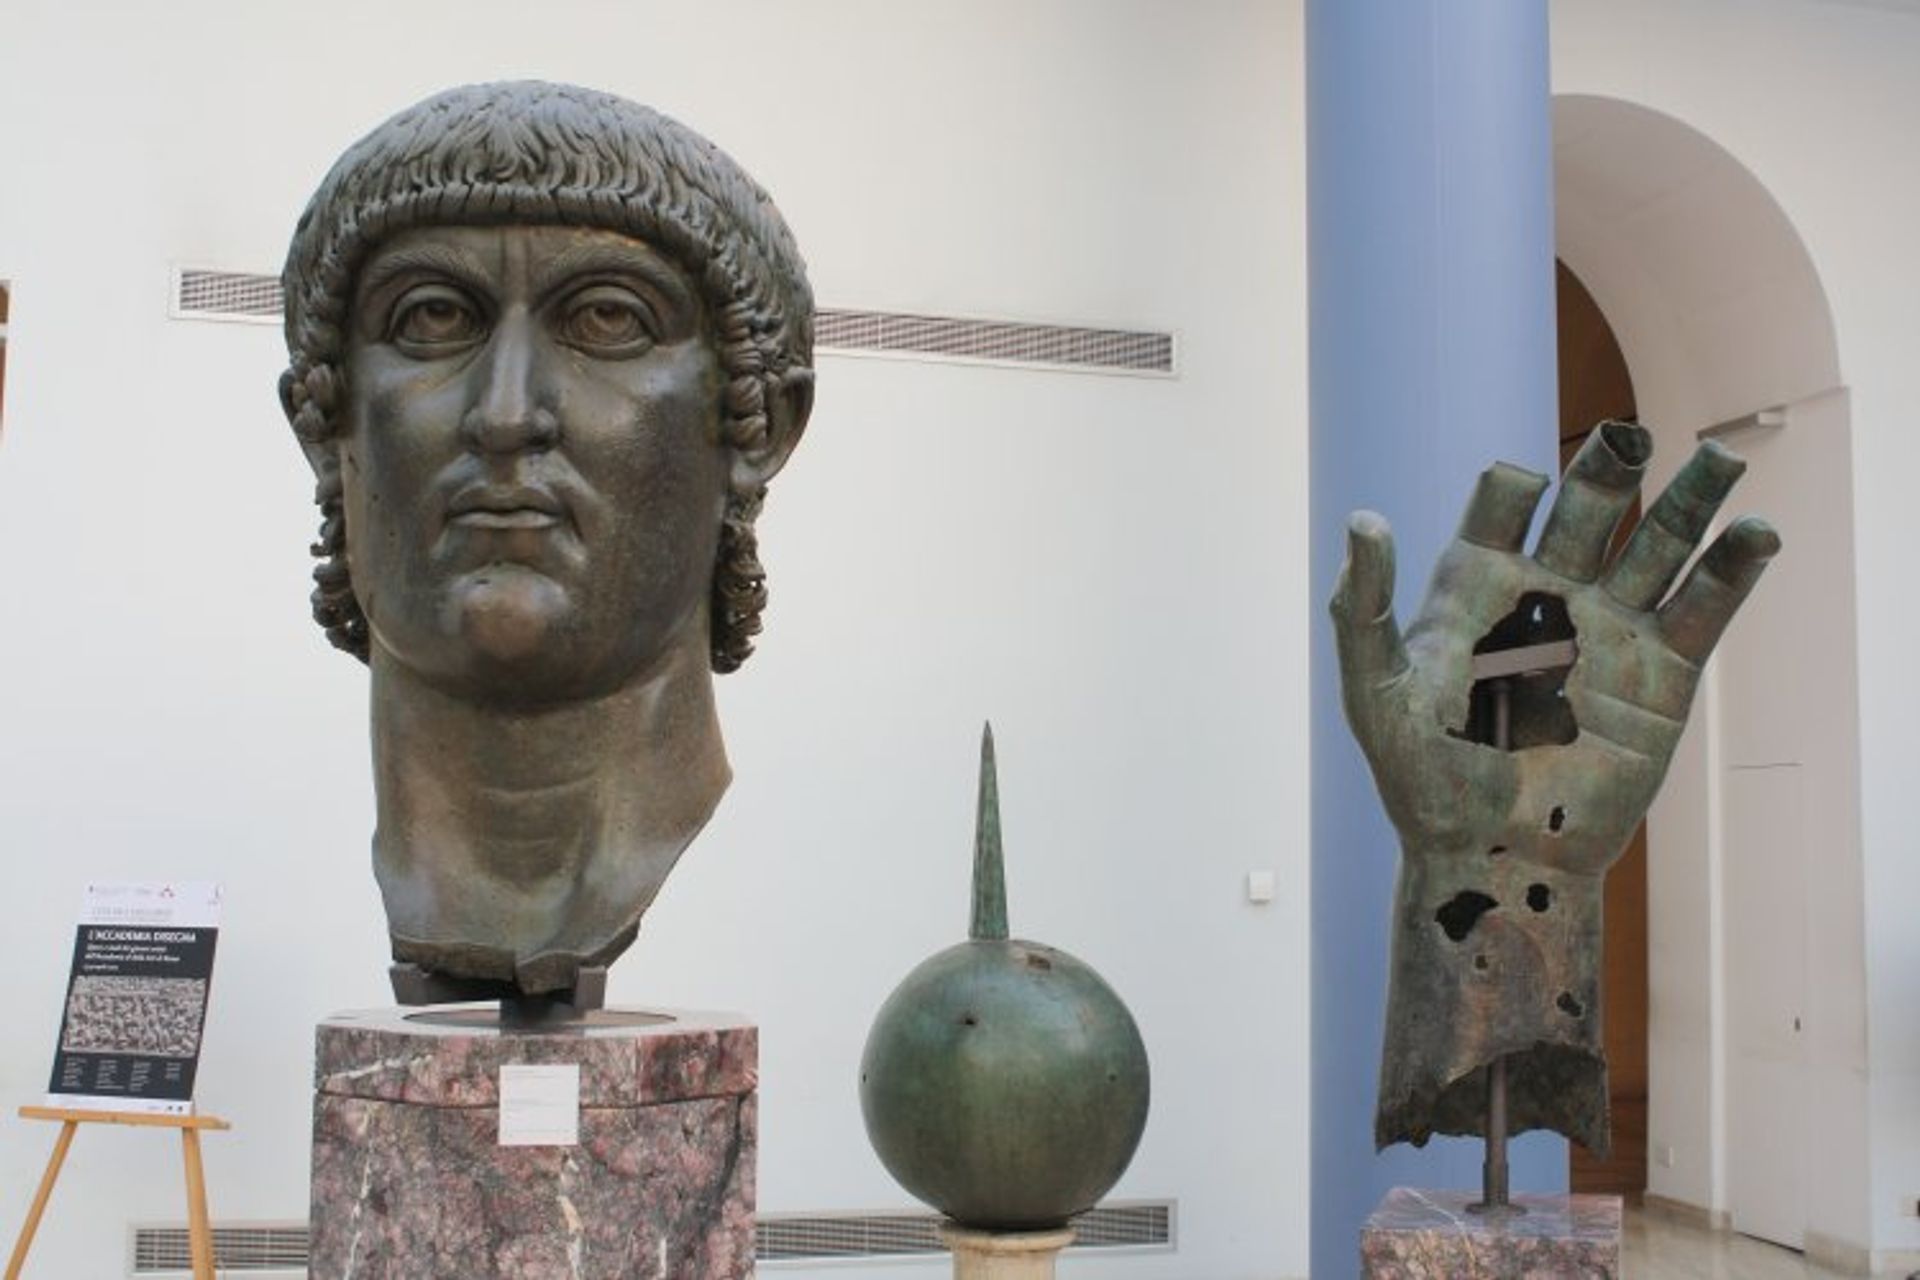 The head, hand and sphere from the colossal bronze statue of Constantine I in the Capitoline Museums in Rome Ancient History Encyclopedia